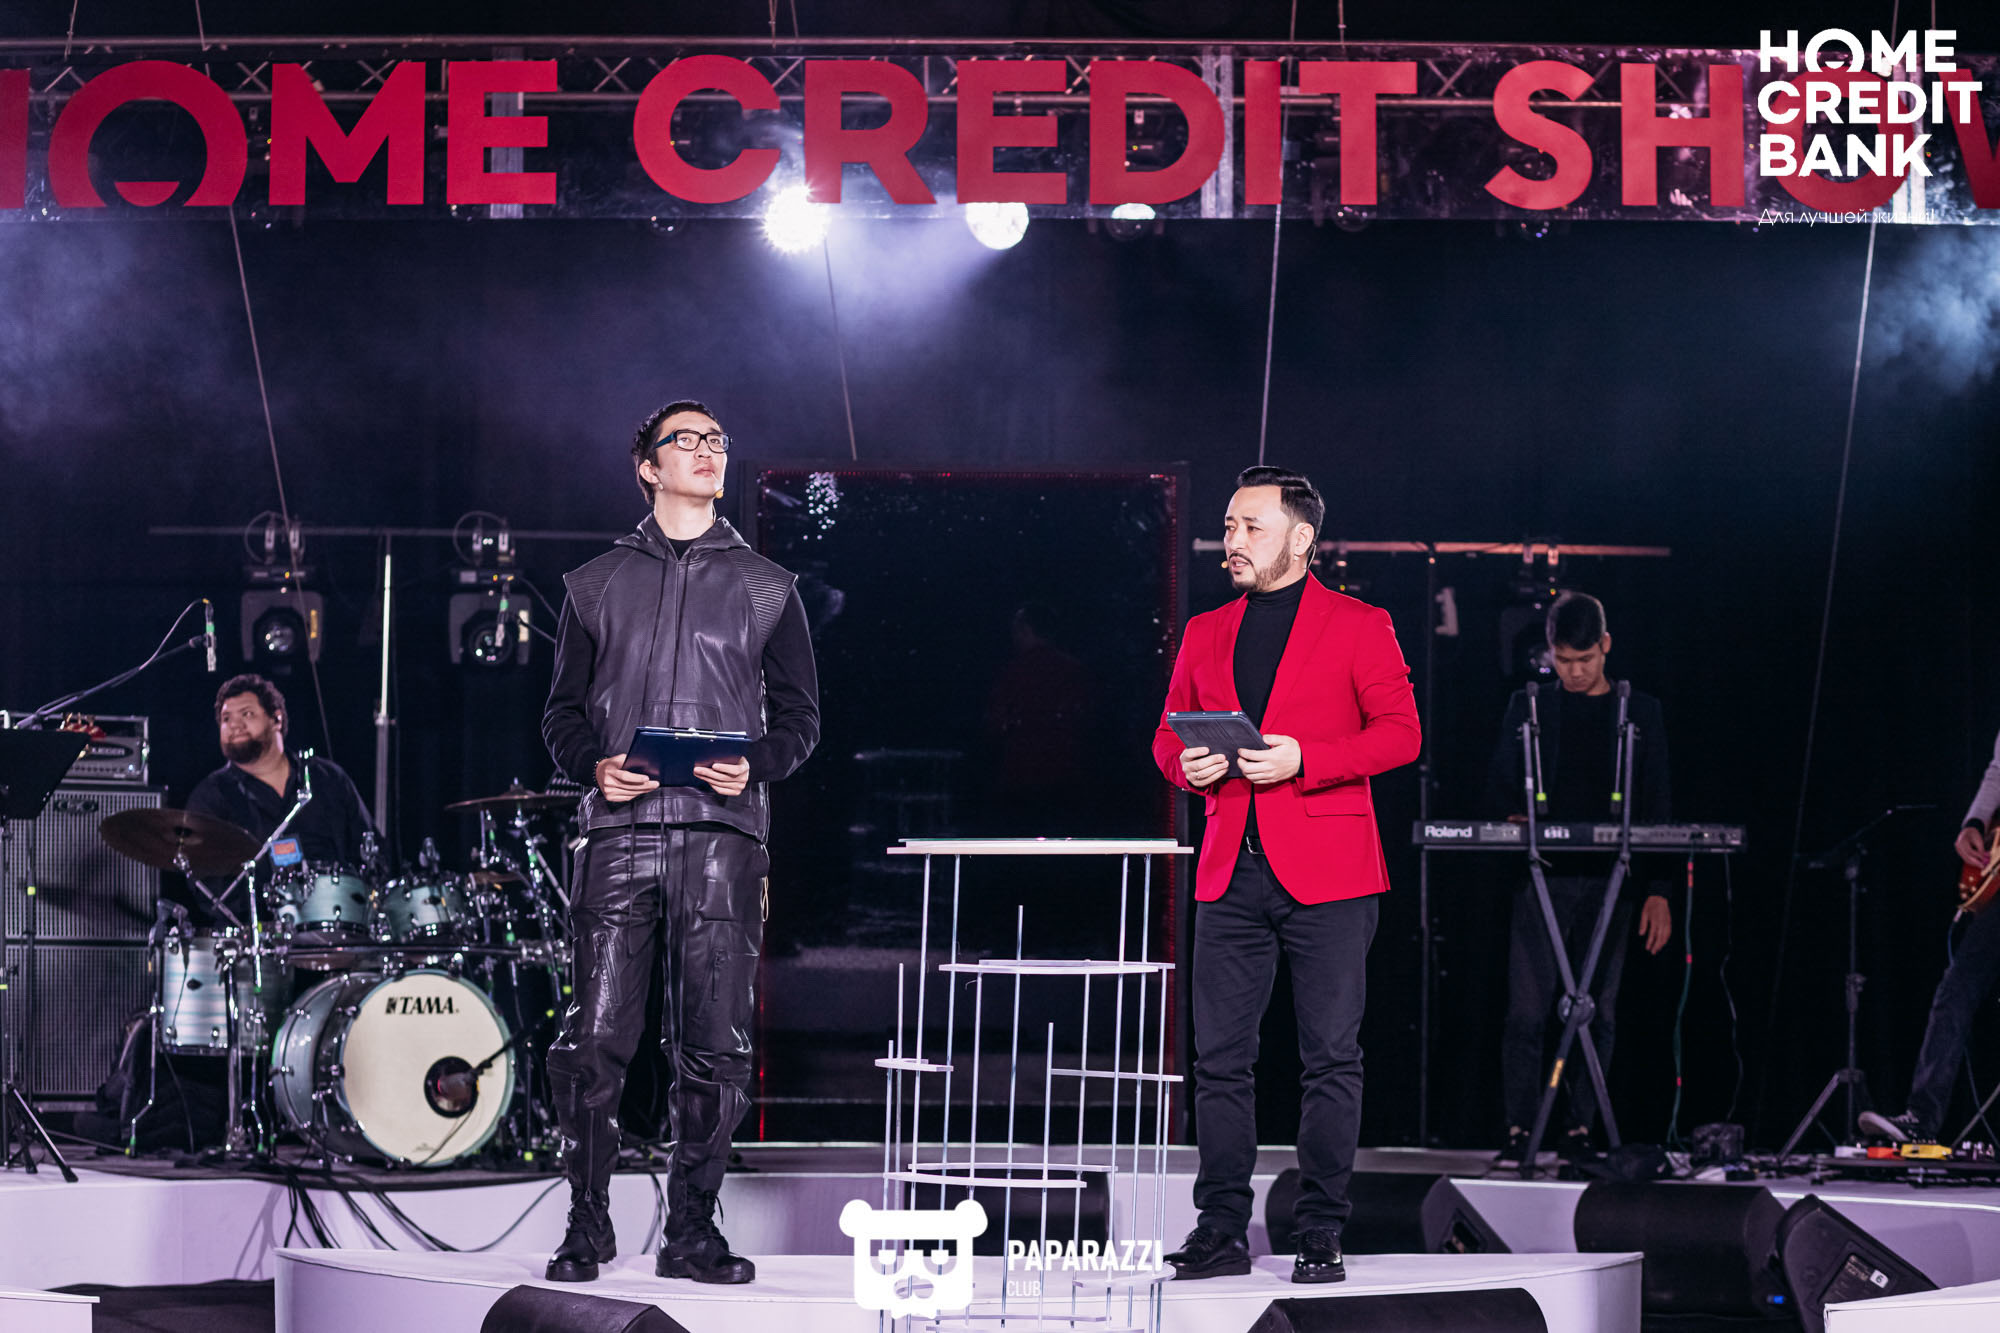 Home Credit Show